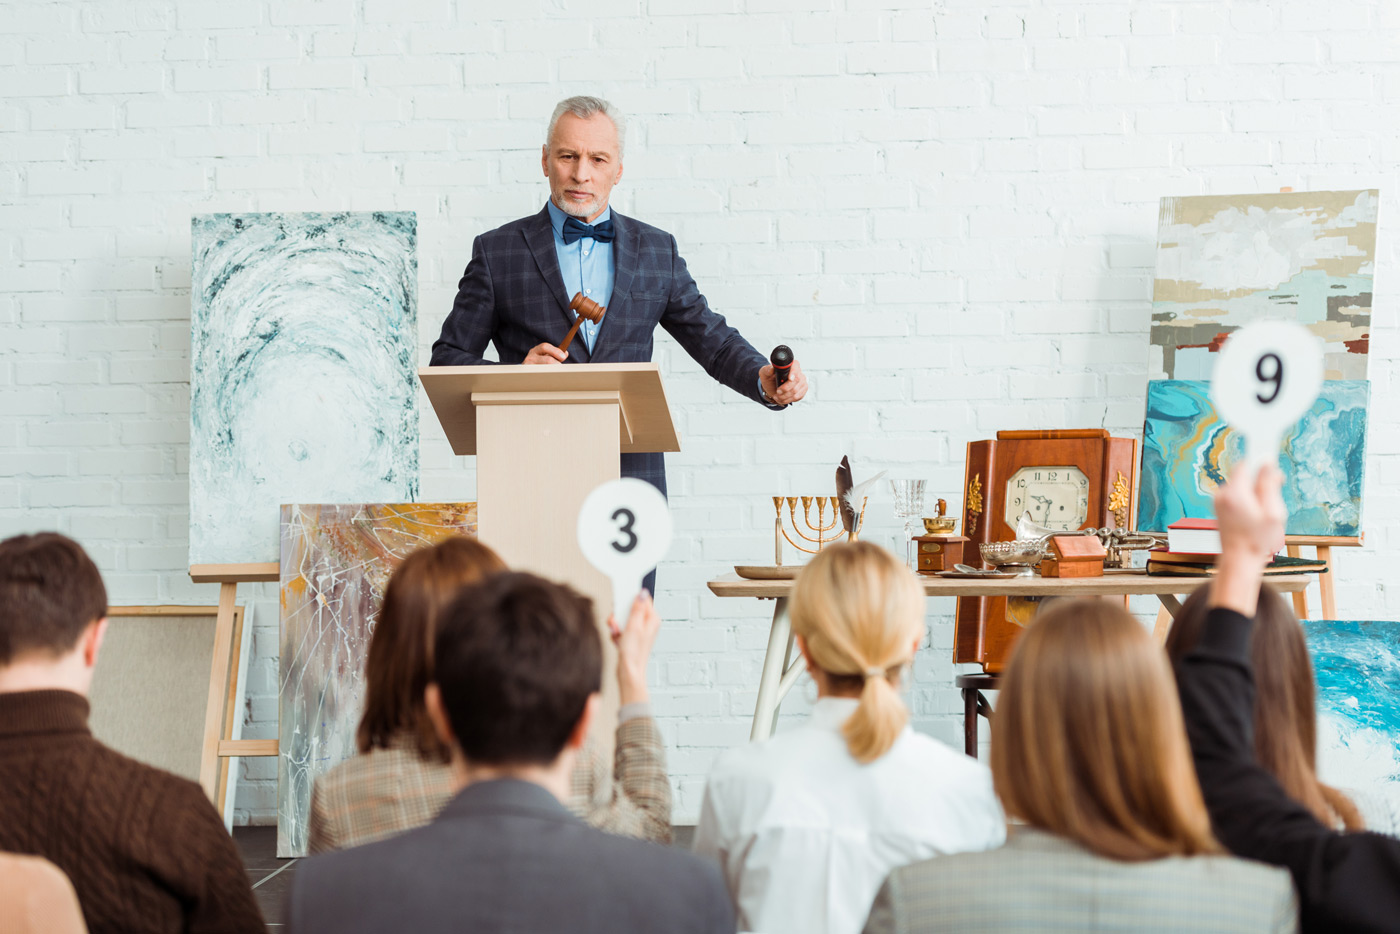 Auctioneer holding an auction legally with a surety bond